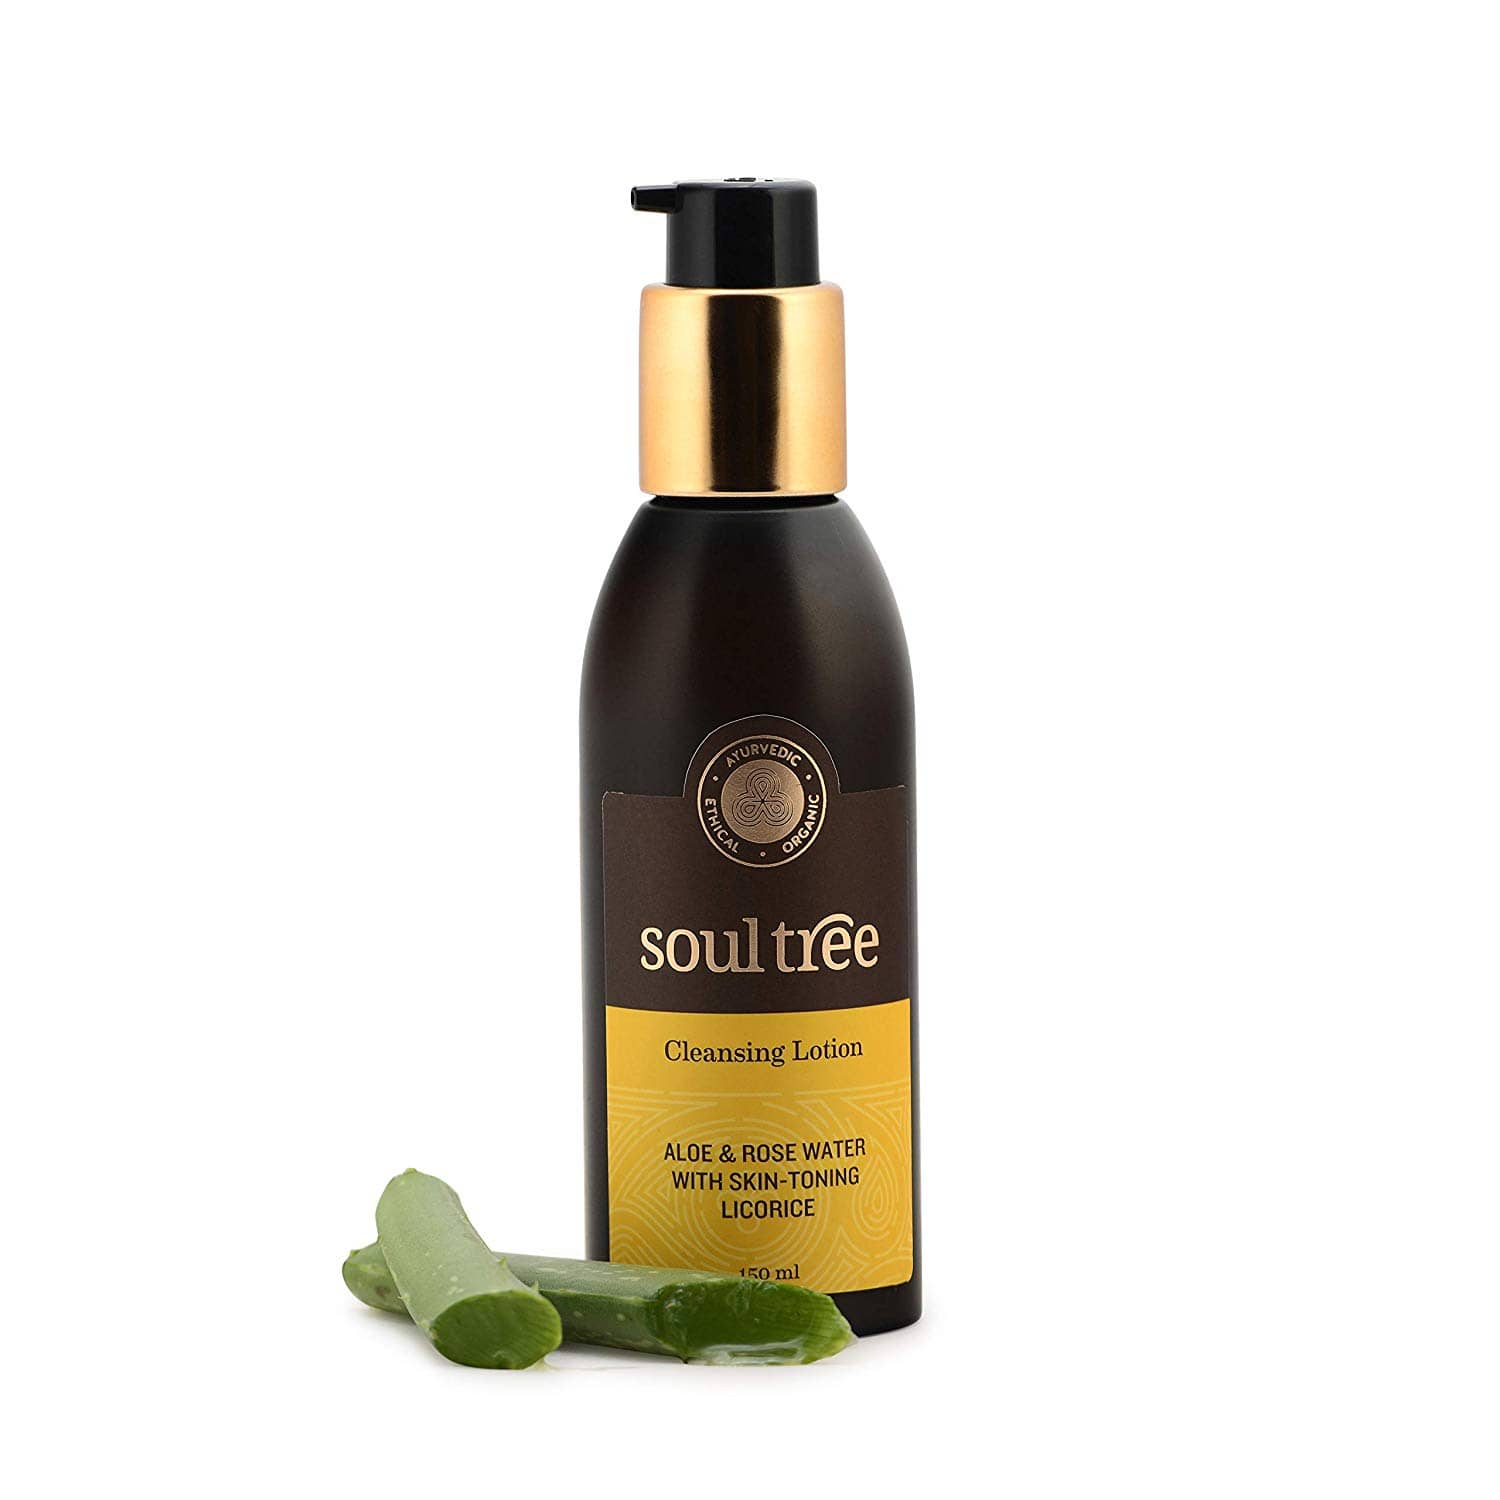 SoulTree Cleansing Lotion Aloe & Rose Water With Skin Toning Licorice